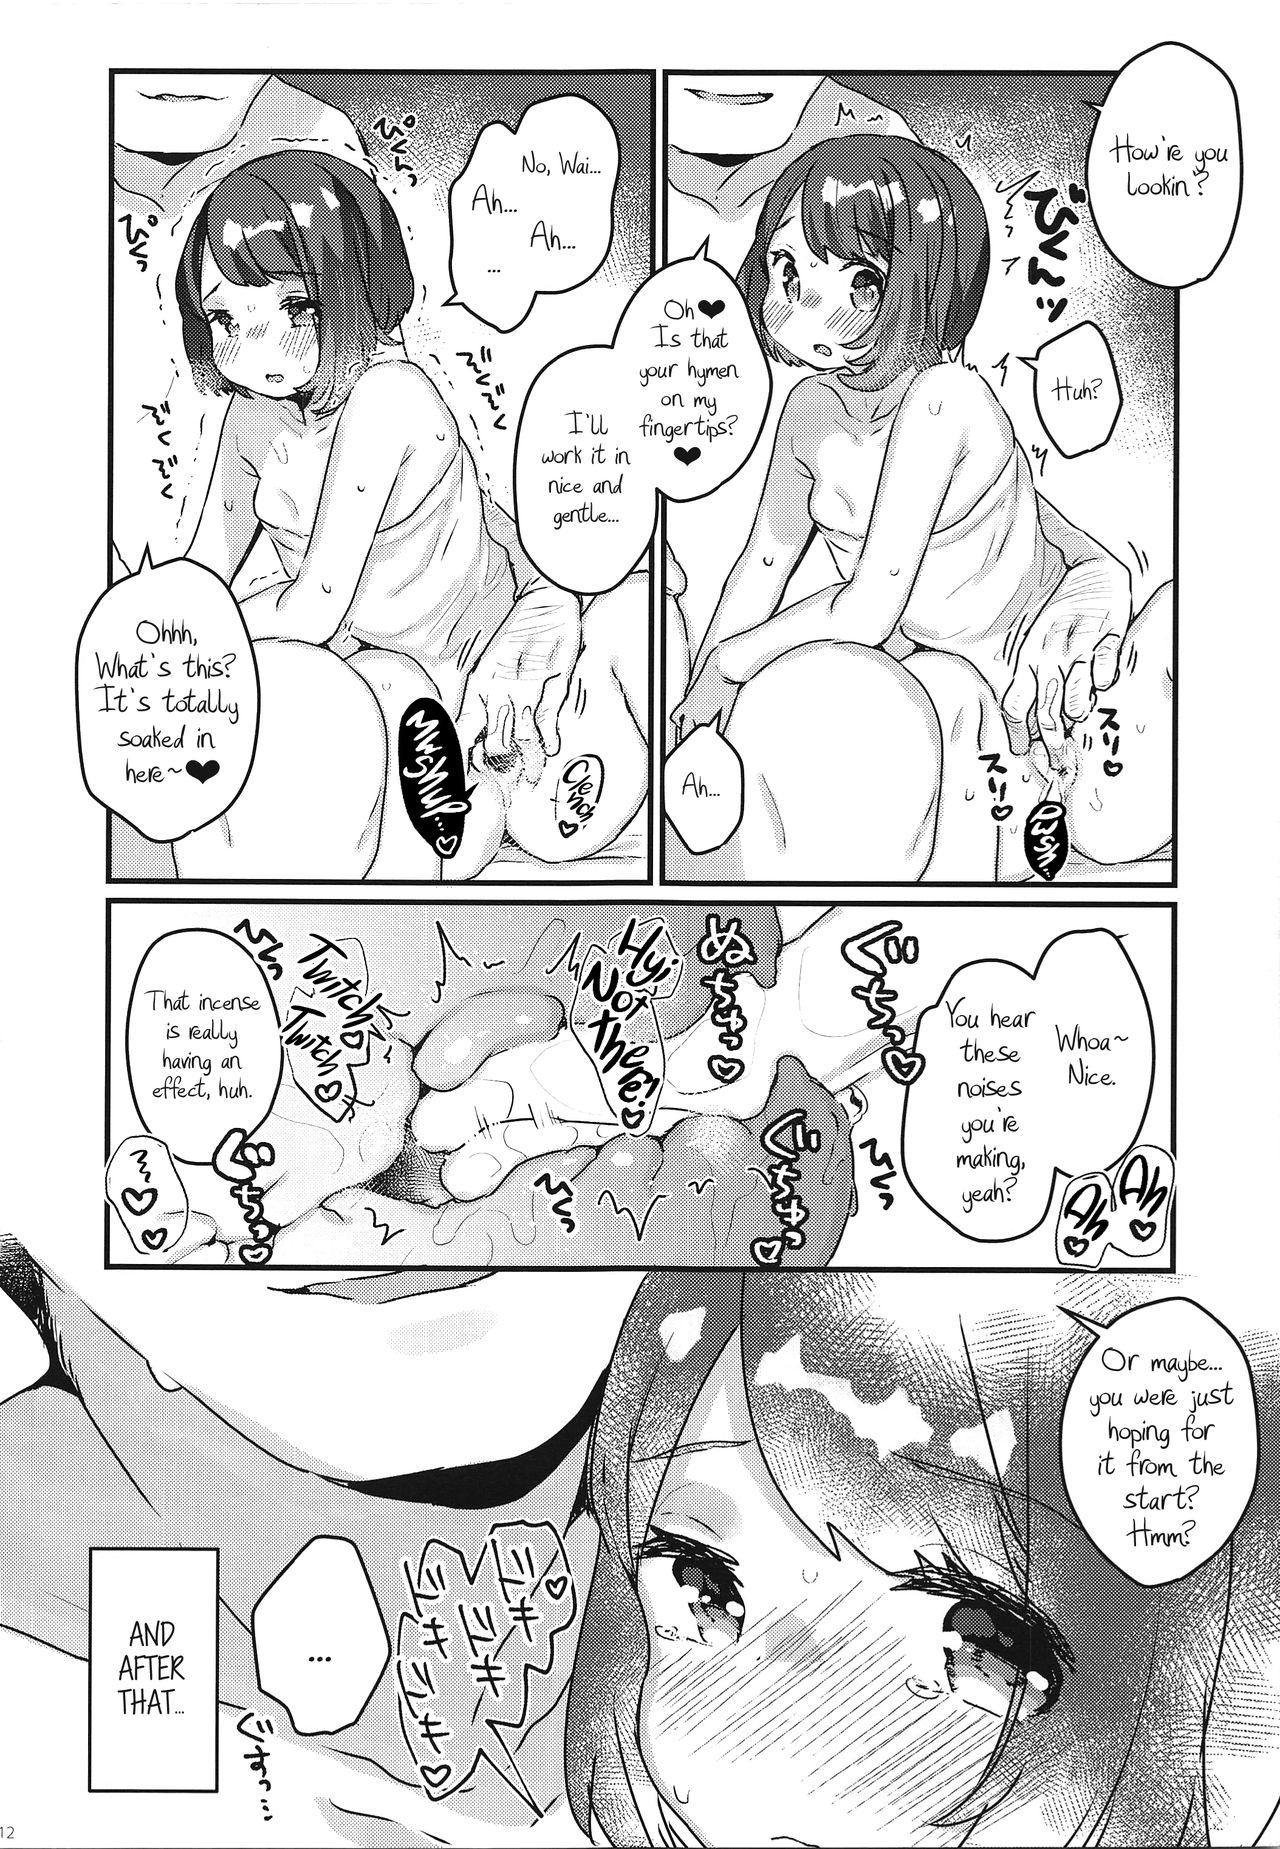 Amateur "Datte Fuku, Taka Iindamon" | "I Mean, Clothes Are Just so Expensive~" - Pokemon Bare - Page 12